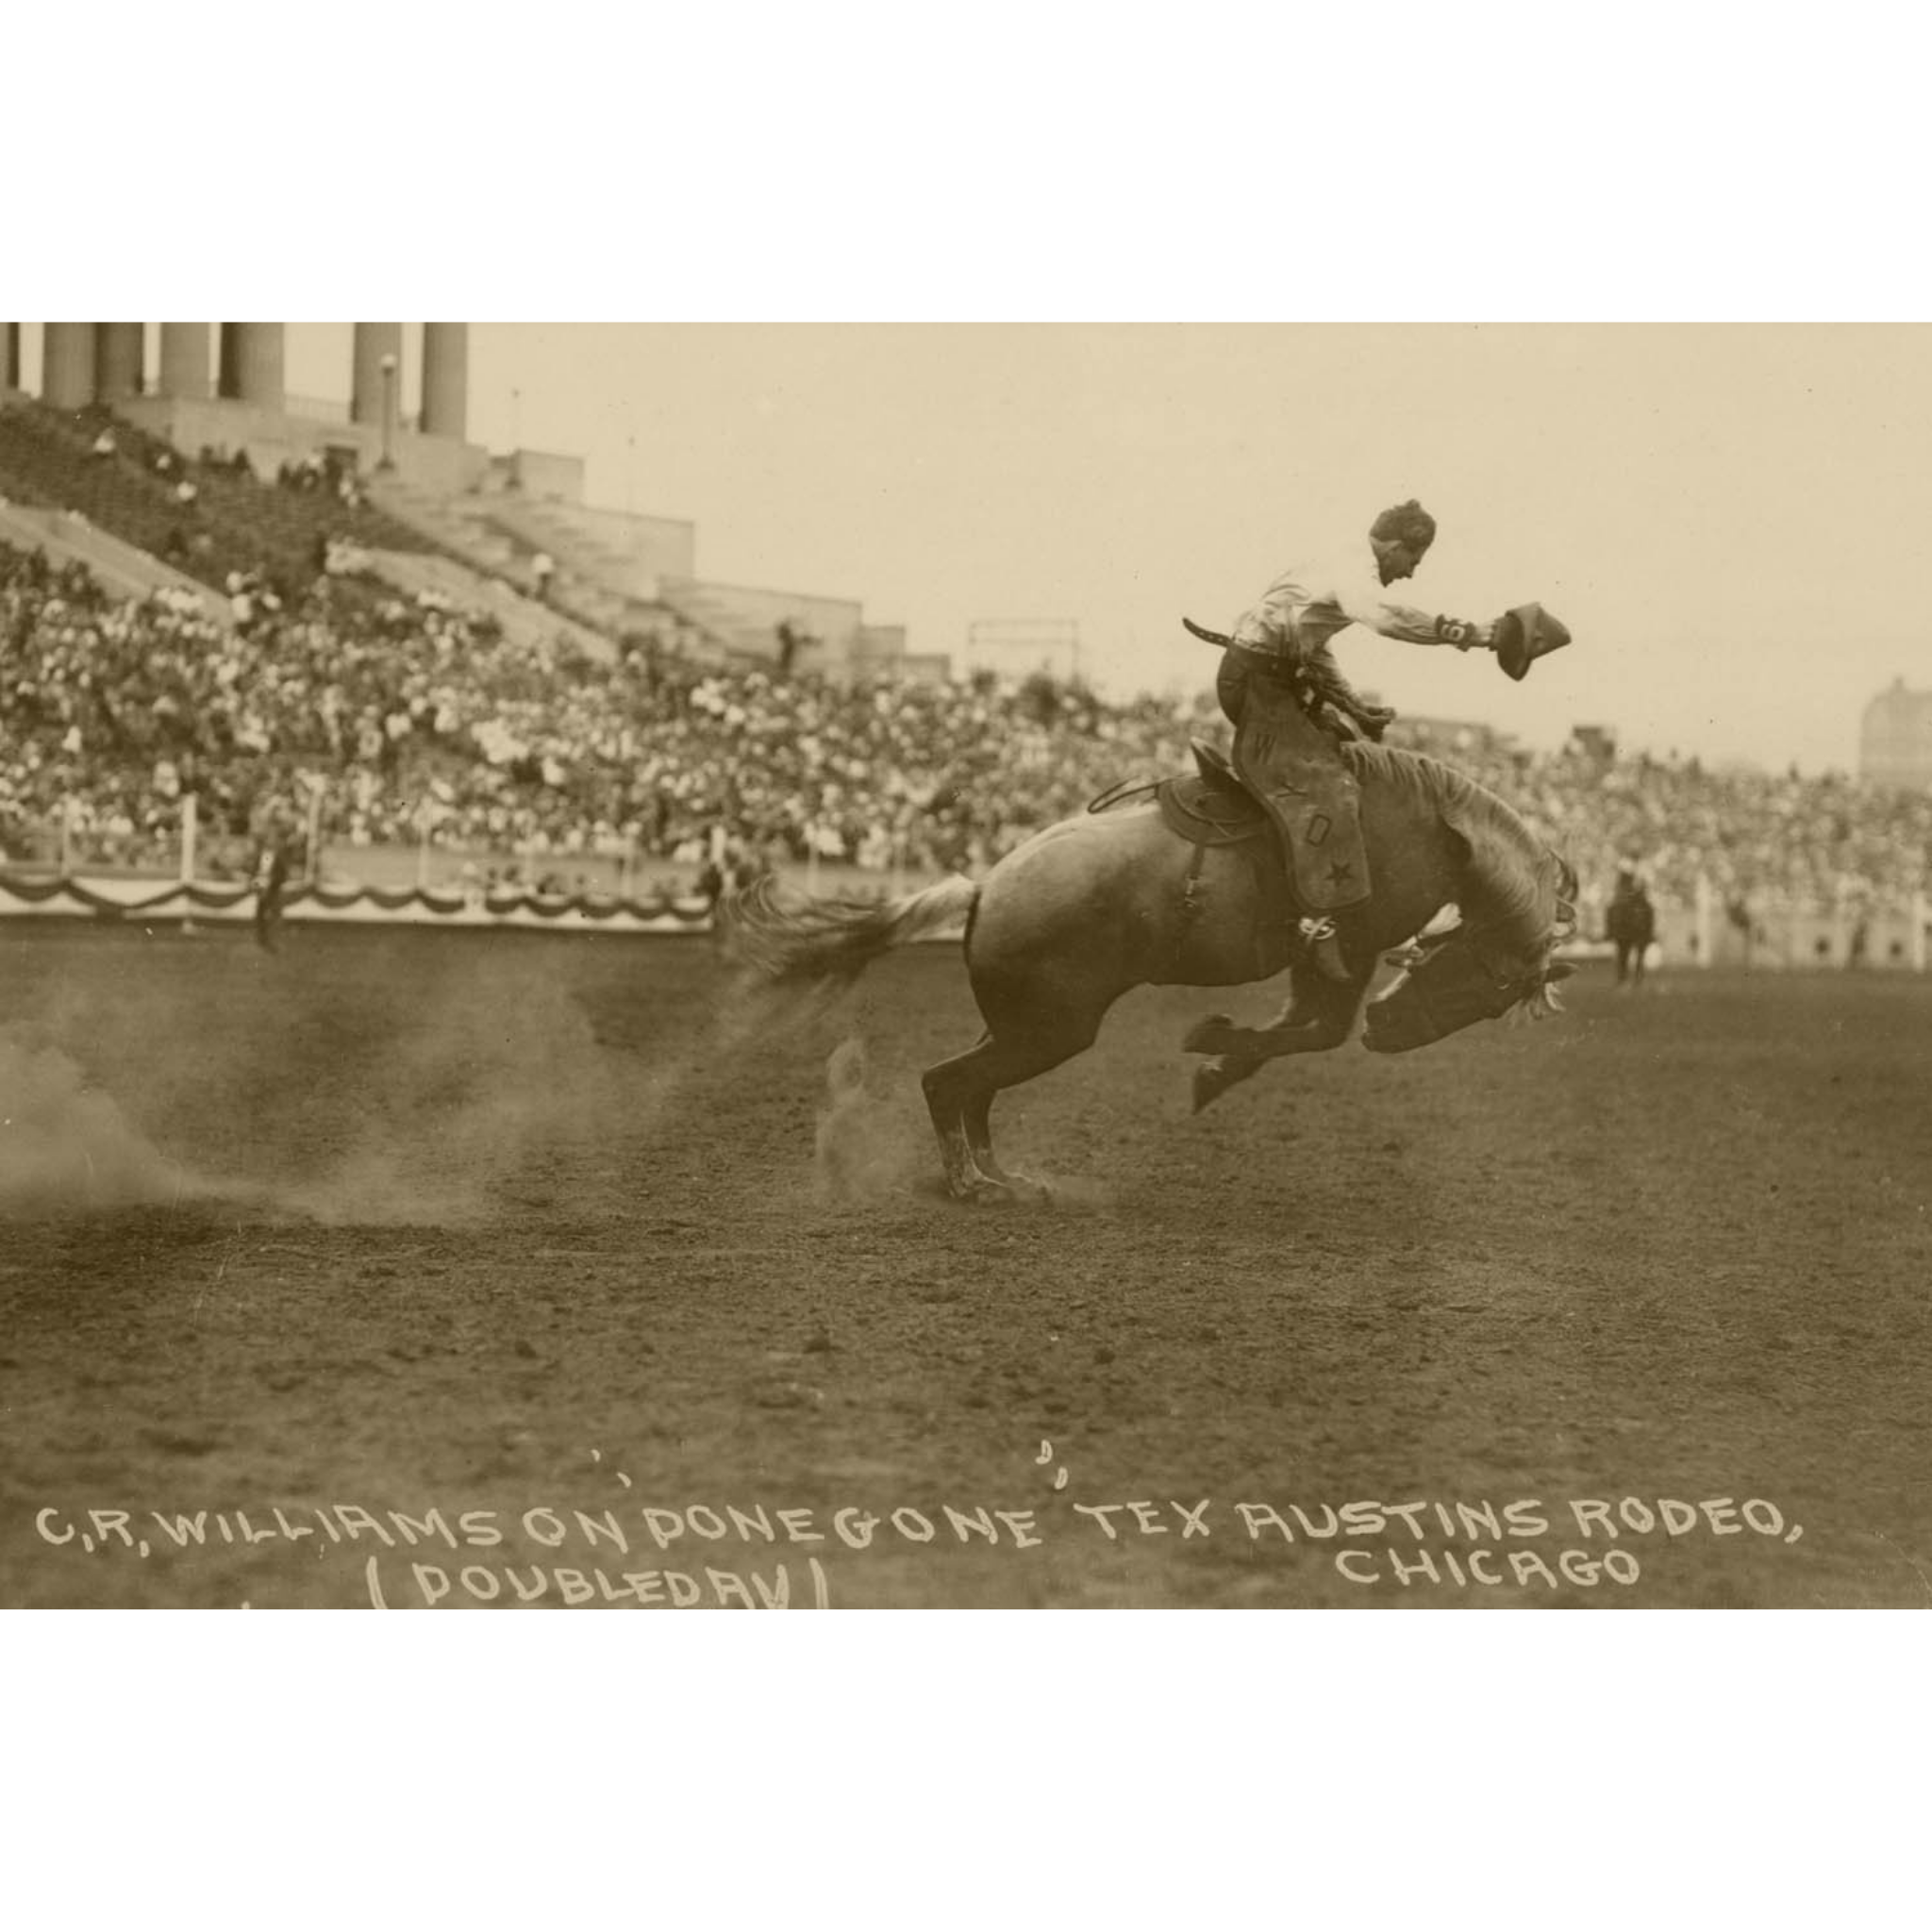 Rodeo Cowboys 3 - CR Williams on Done Gone - ca. 1916 Photograph